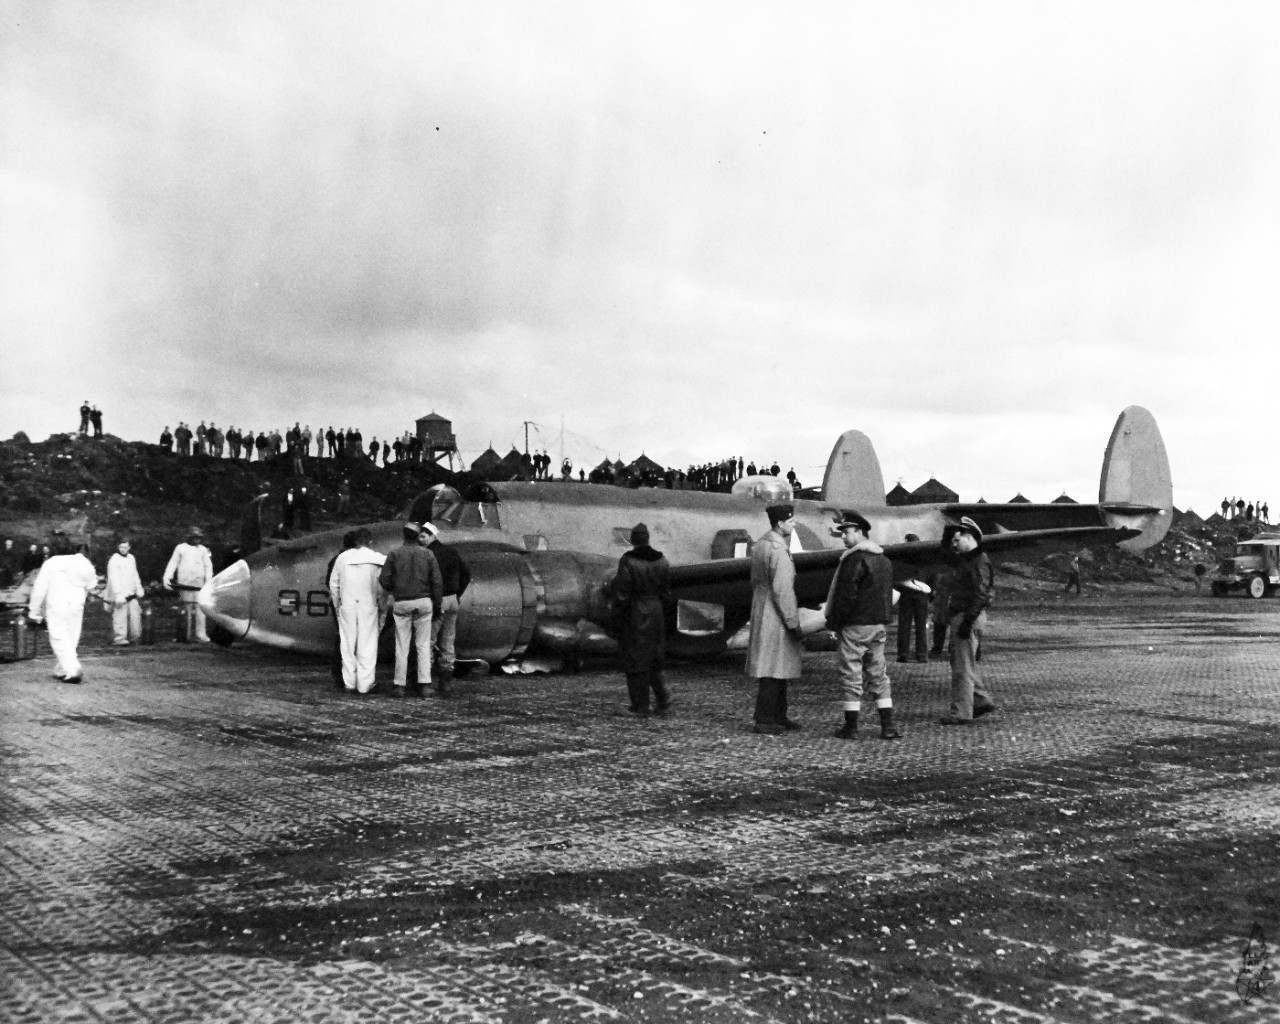 80-G-239344:  Attu, Alaska, May 1944.    Crash landing of a PV-1 (Bu #33433) returning to Attu Island, Alaska, from encounter with Japanese auxiliary vessel in the North Pacific.  Lieutenant Q.E. Norem USNR, pilot and Lieutenant Junior Grade G. M. Tambs, USNR, co-pilot was killed during encounter.  Shown:  Officers discussing removal of crashed plane from runway, released May 19, 1944.    U.S. Navy photograph, now in the collections of the National Archives.  (2017/03/07).